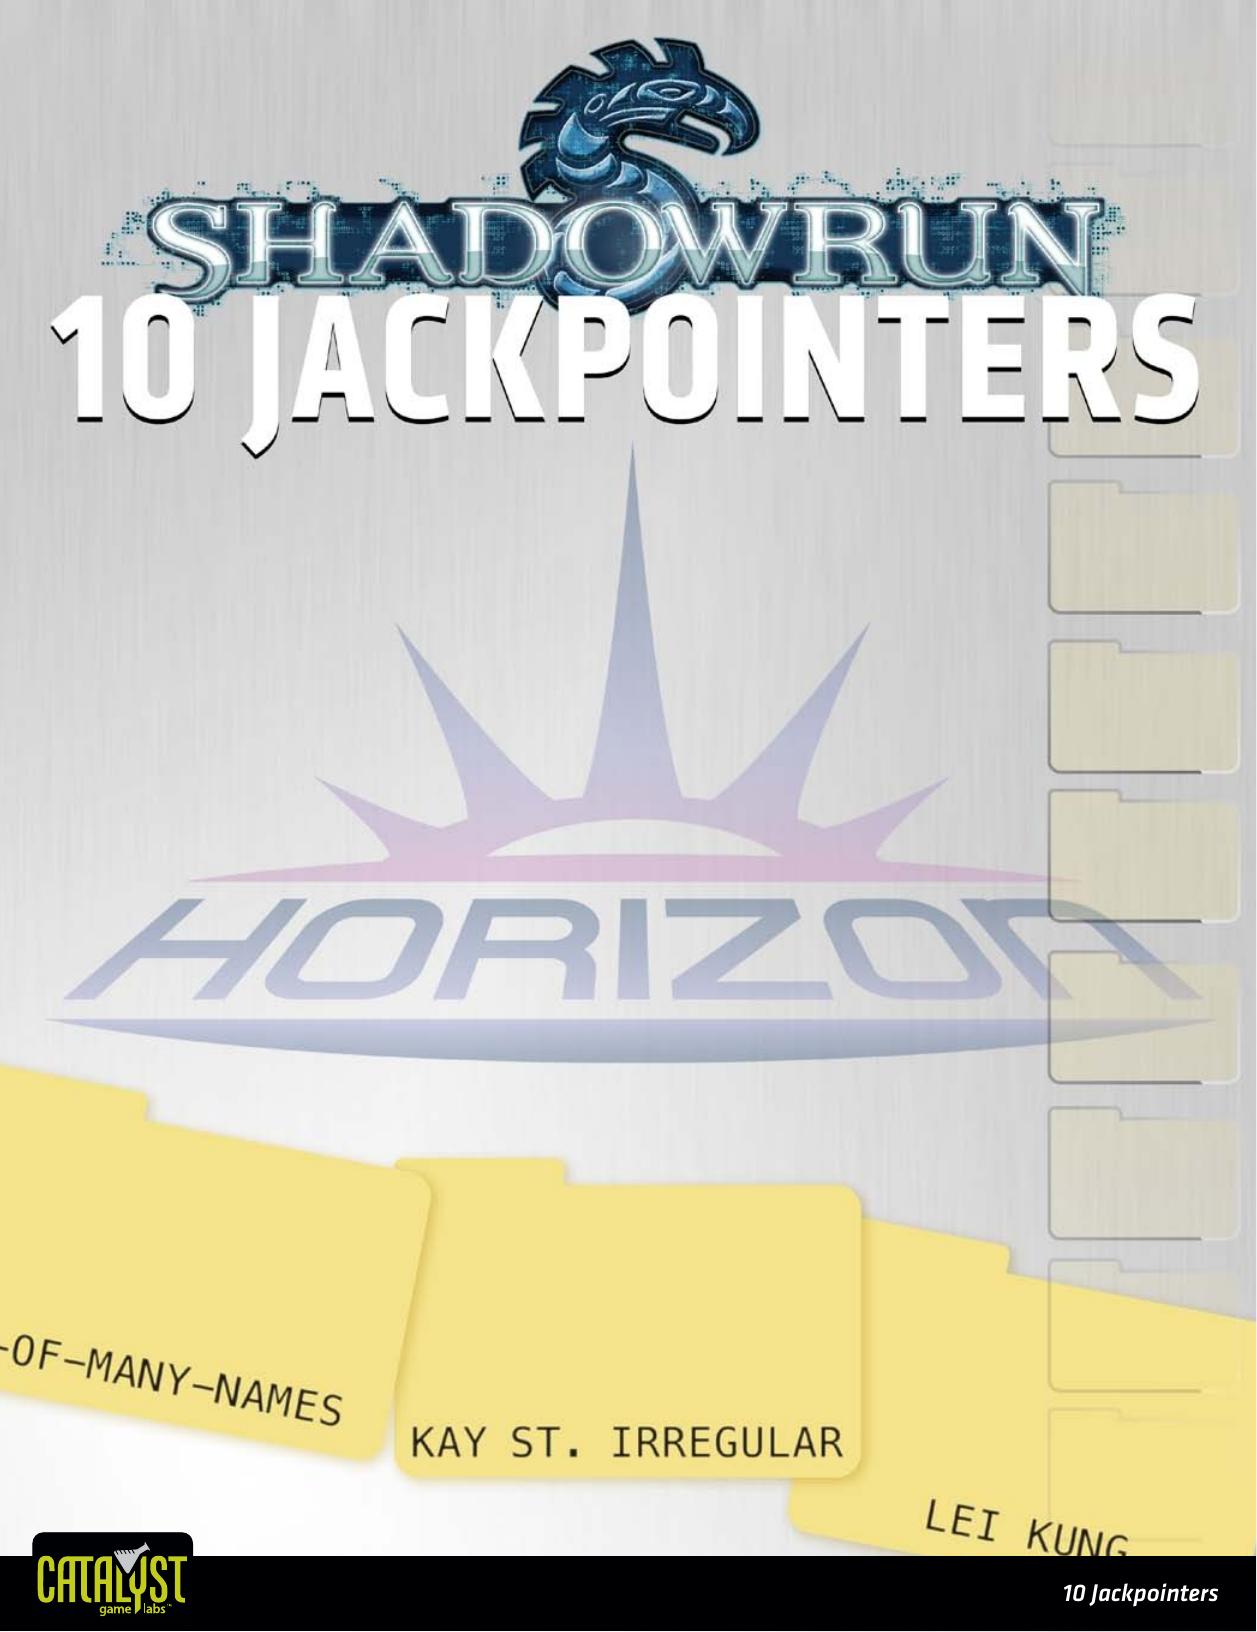 10 Jackpointers